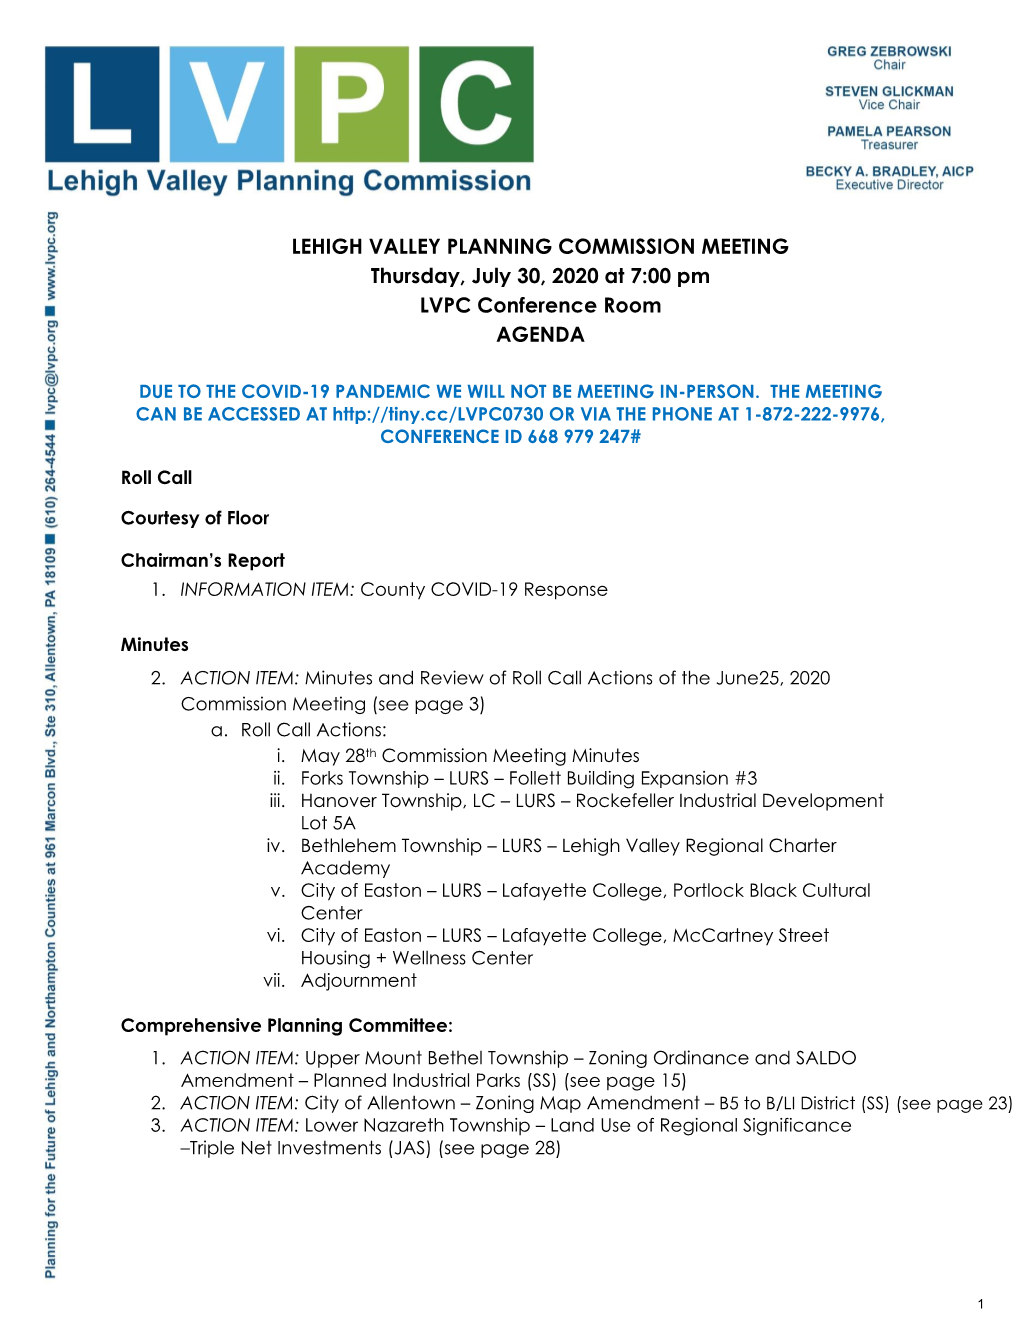 LEHIGH VALLEY PLANNING COMMISSION MEETING Thursday, July 30, 2020 at 7:00 Pm LVPC Conference Room AGENDA